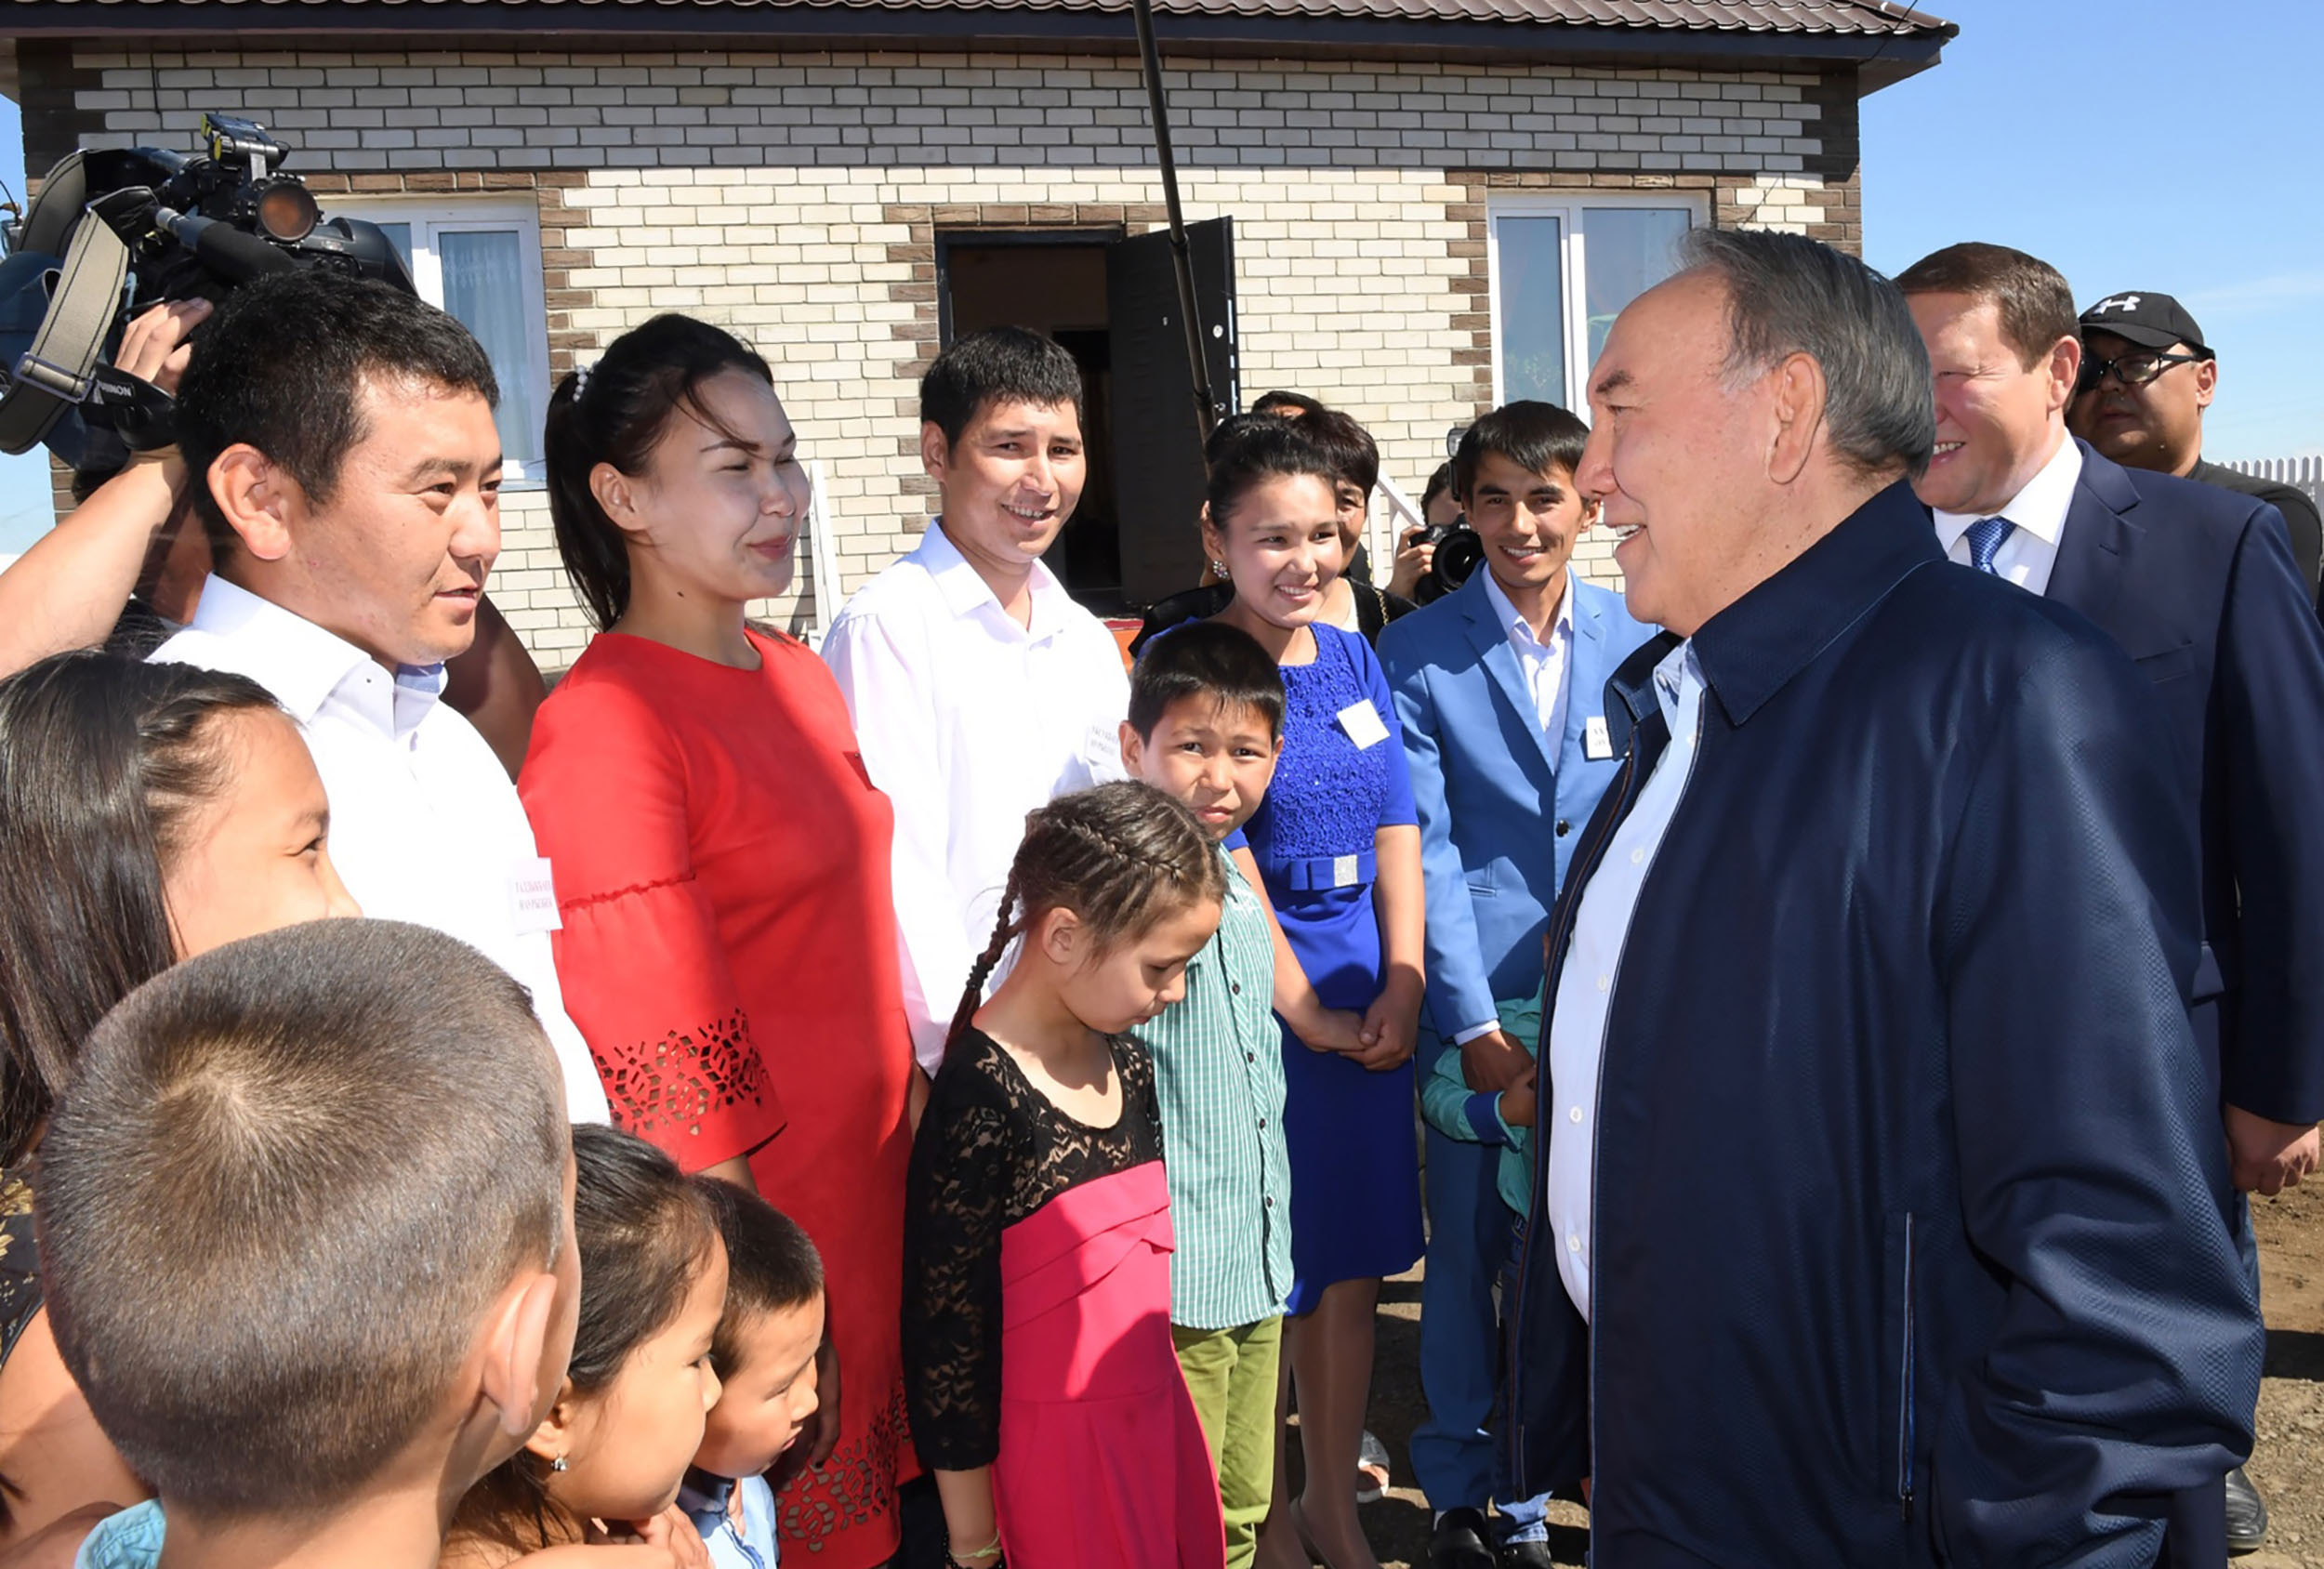 Kazakh President acquainted with house construction progress in the village of Ilyichevka